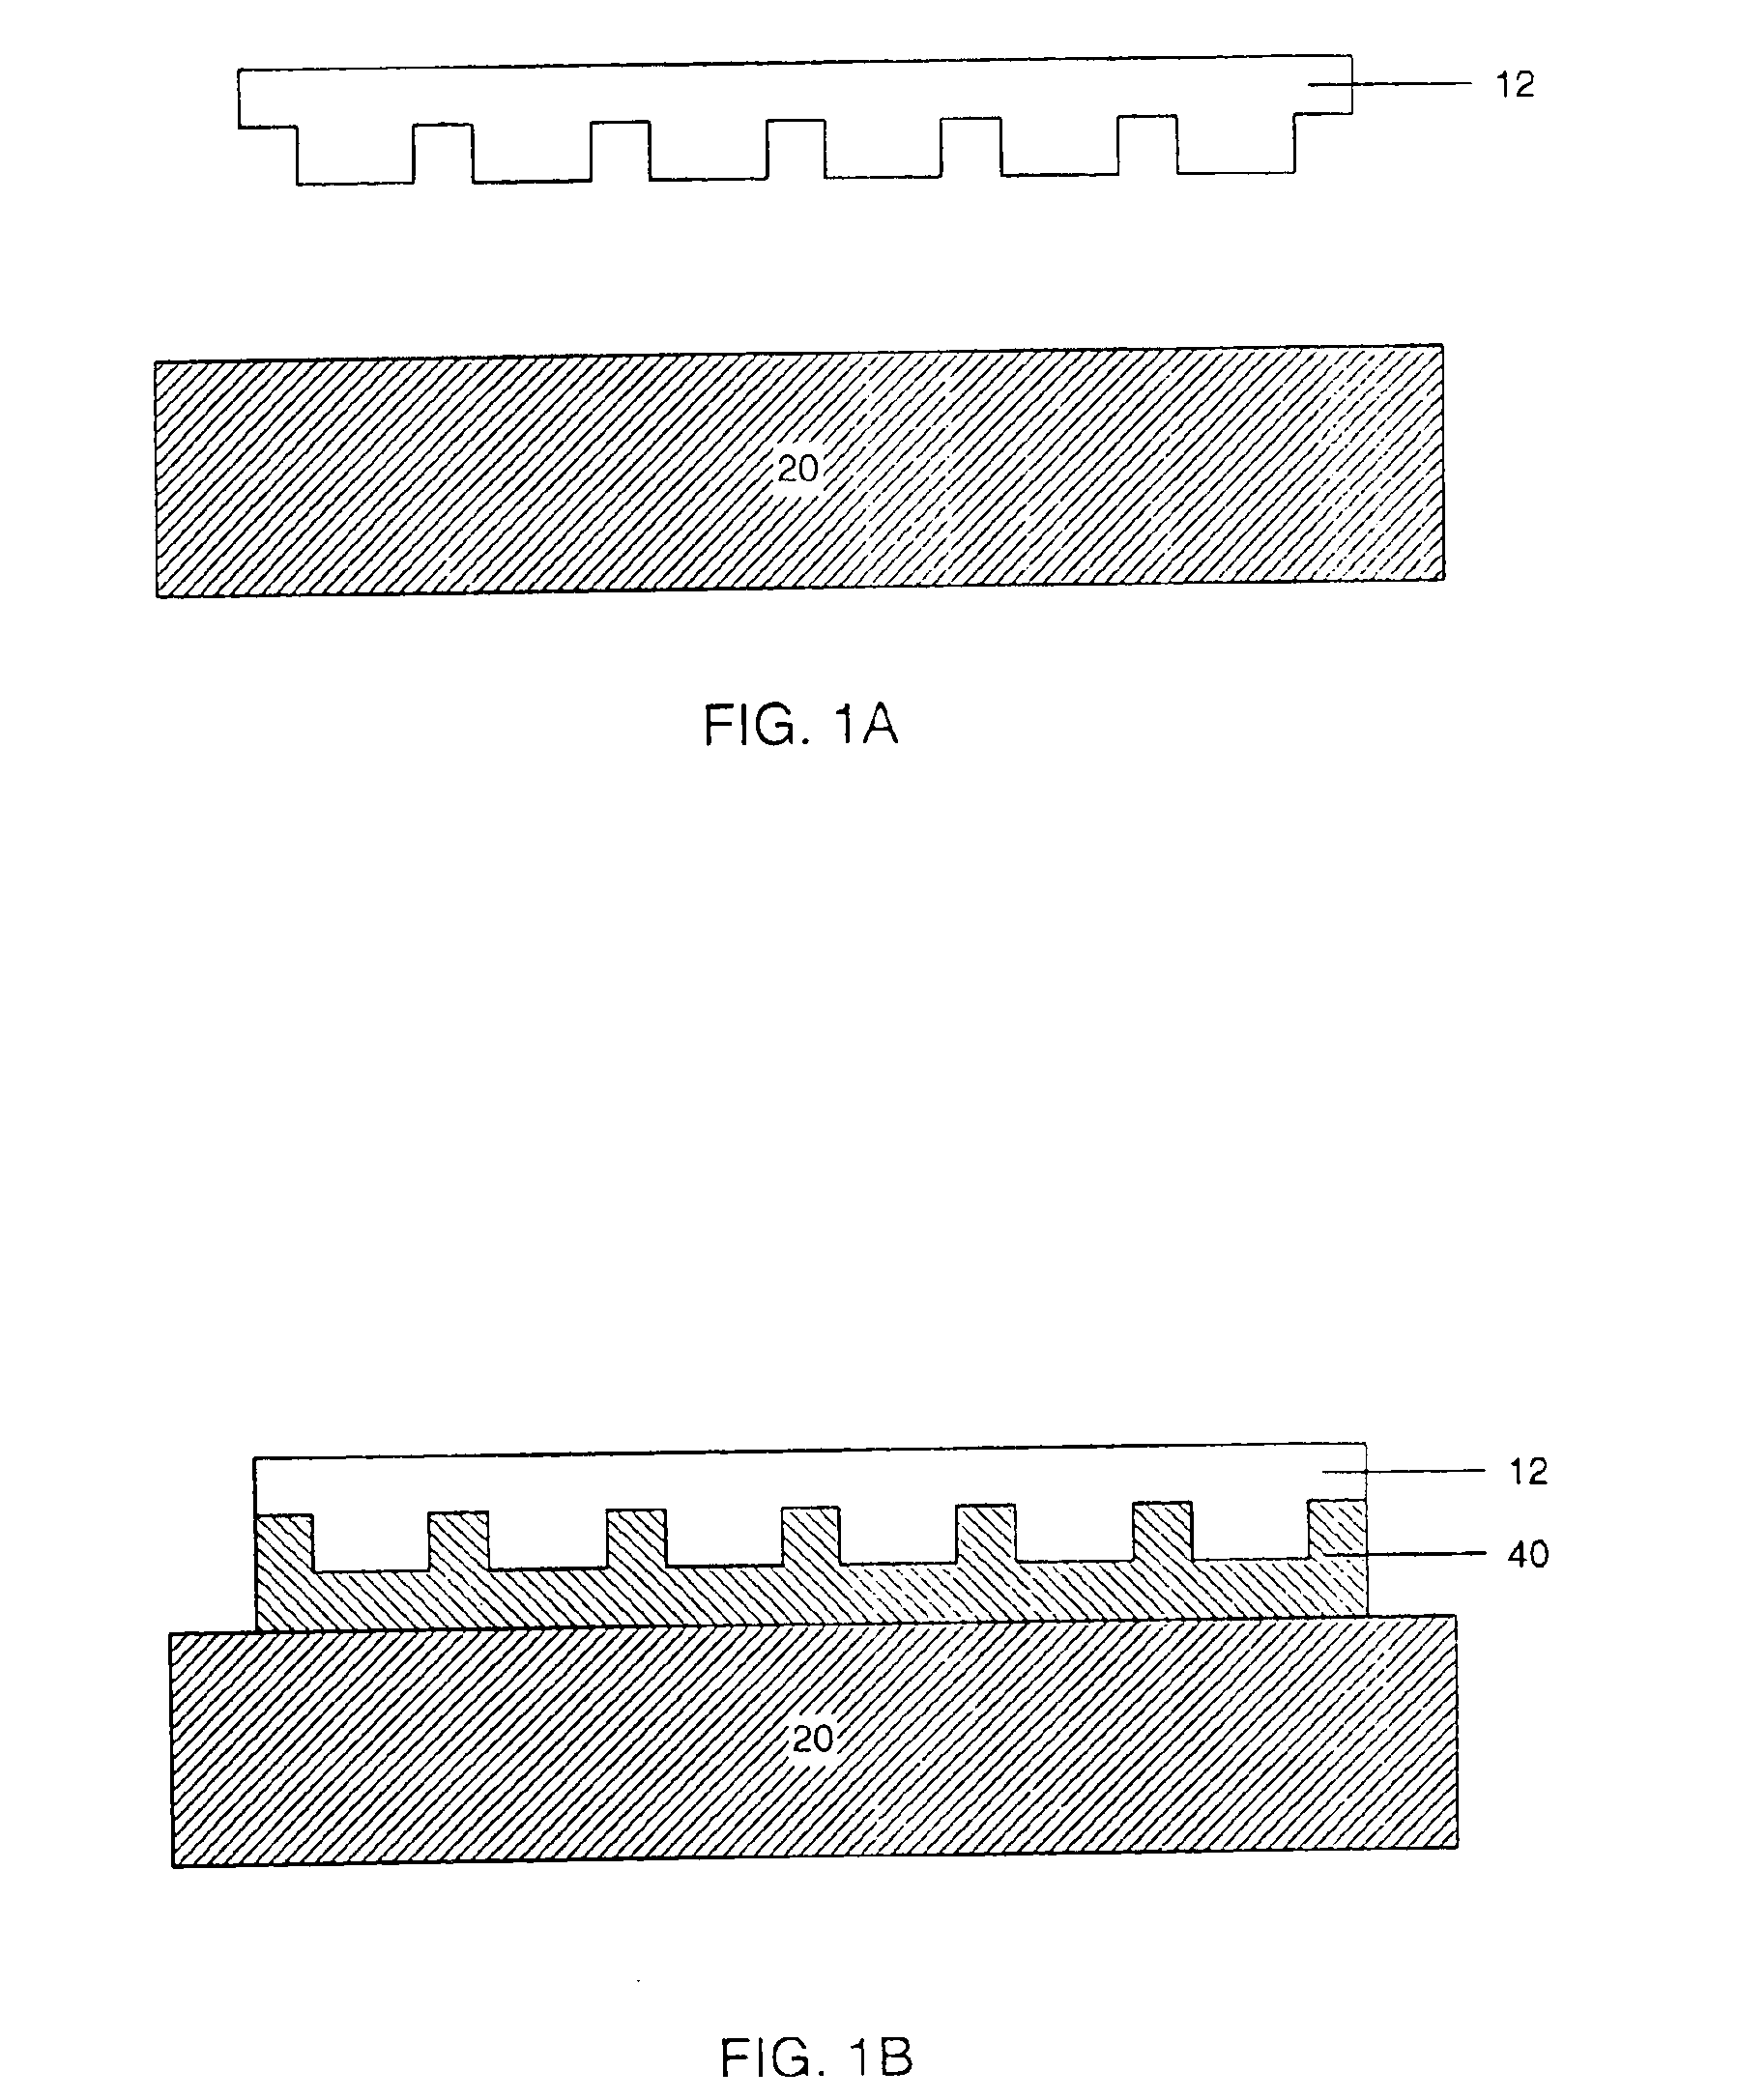 Methods of inspecting a lithography template